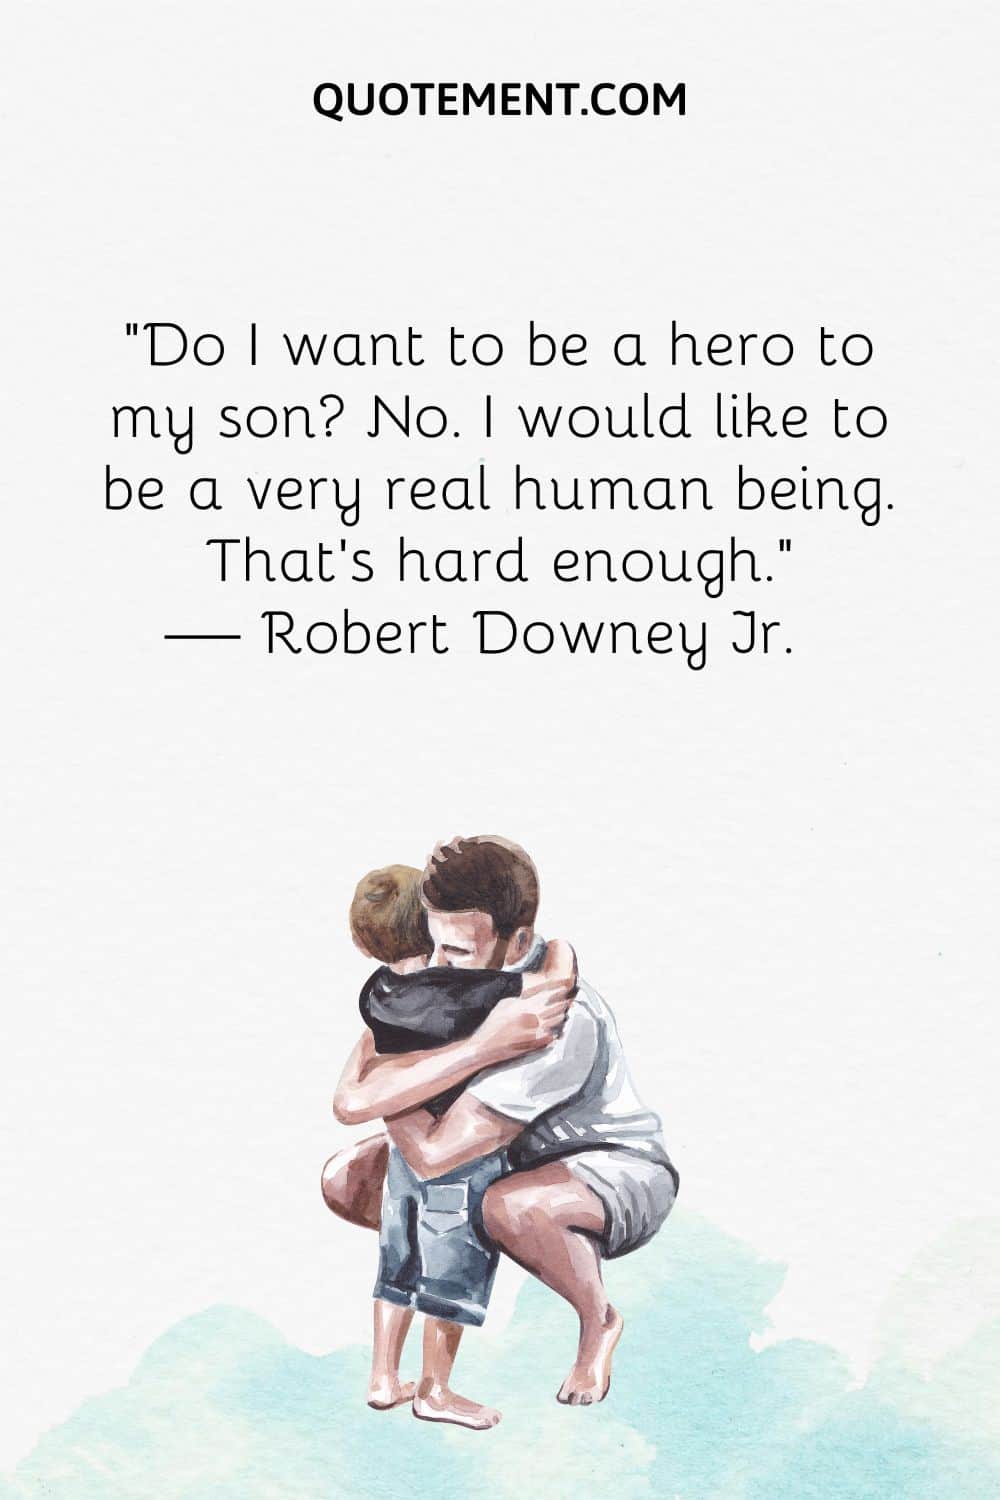 Do I want to be a hero to my son No